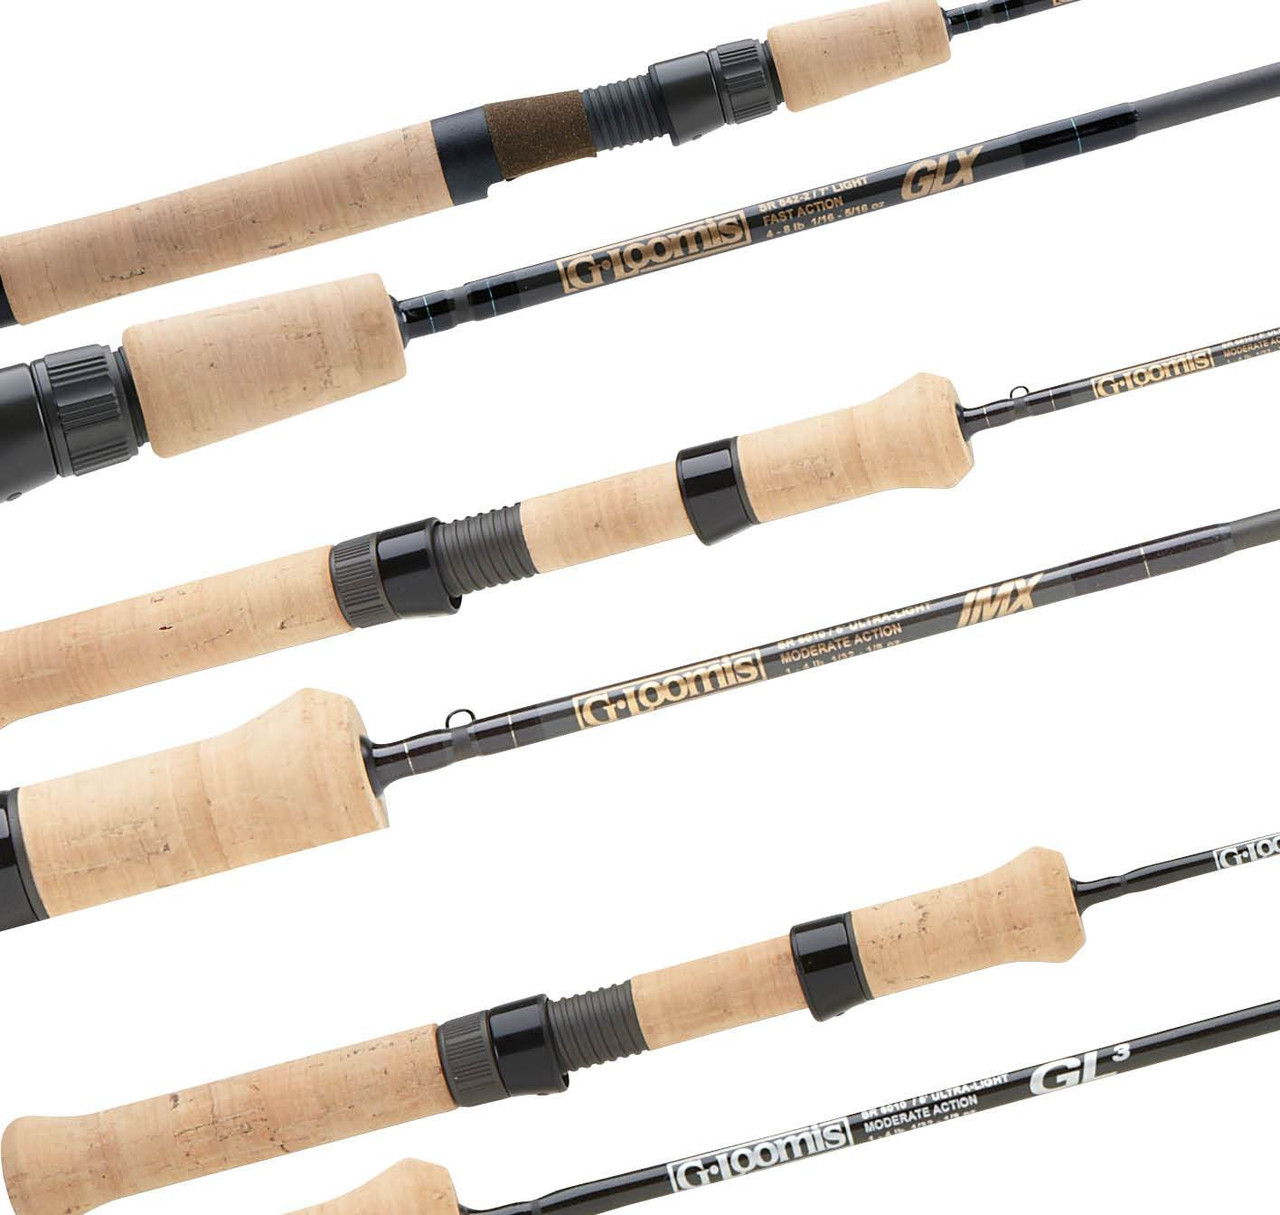 https://cdn11.bigcommerce.com/s-i6ykqoitnd/images/stencil/1280x1280/products/8864/59703/g-loomis-classic-trout-panfish-spinning-rods-trout-pan-fish-rods-g-loomis-230410__50335.1639601269.jpg?c=1&imbypass=on